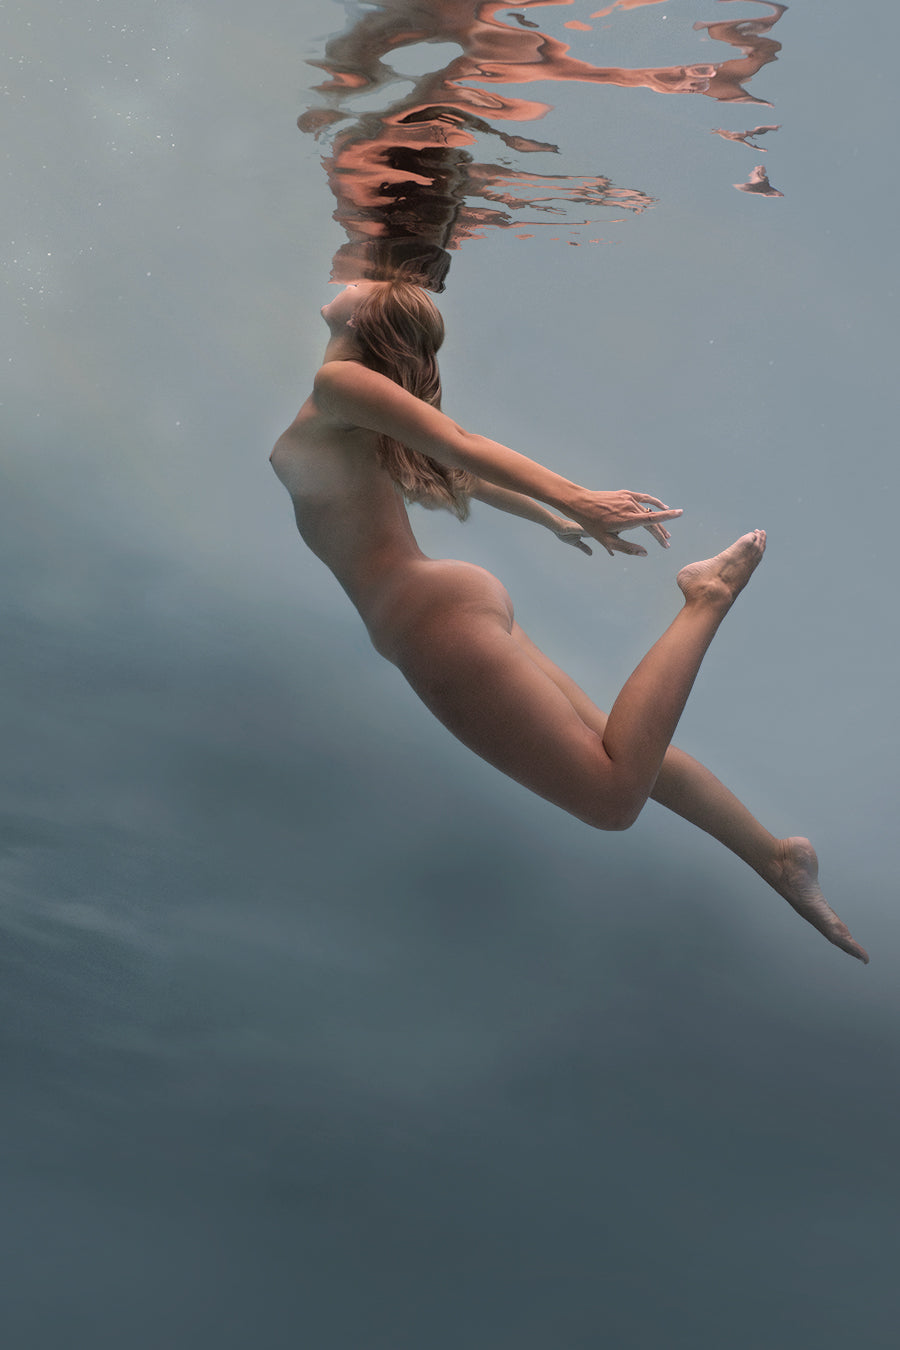 "Within the depths of the sea, a stunning  figure, embodying the essence of a Naiad, floats gracefully amidst the aquatic realm. Her ethereal beauty and serene presence are accentuated by the play of light and shadow in the fine art photogray. The mysterious allure of the underwater world surrounds her, evoking a sense of enchantment and tranquility."